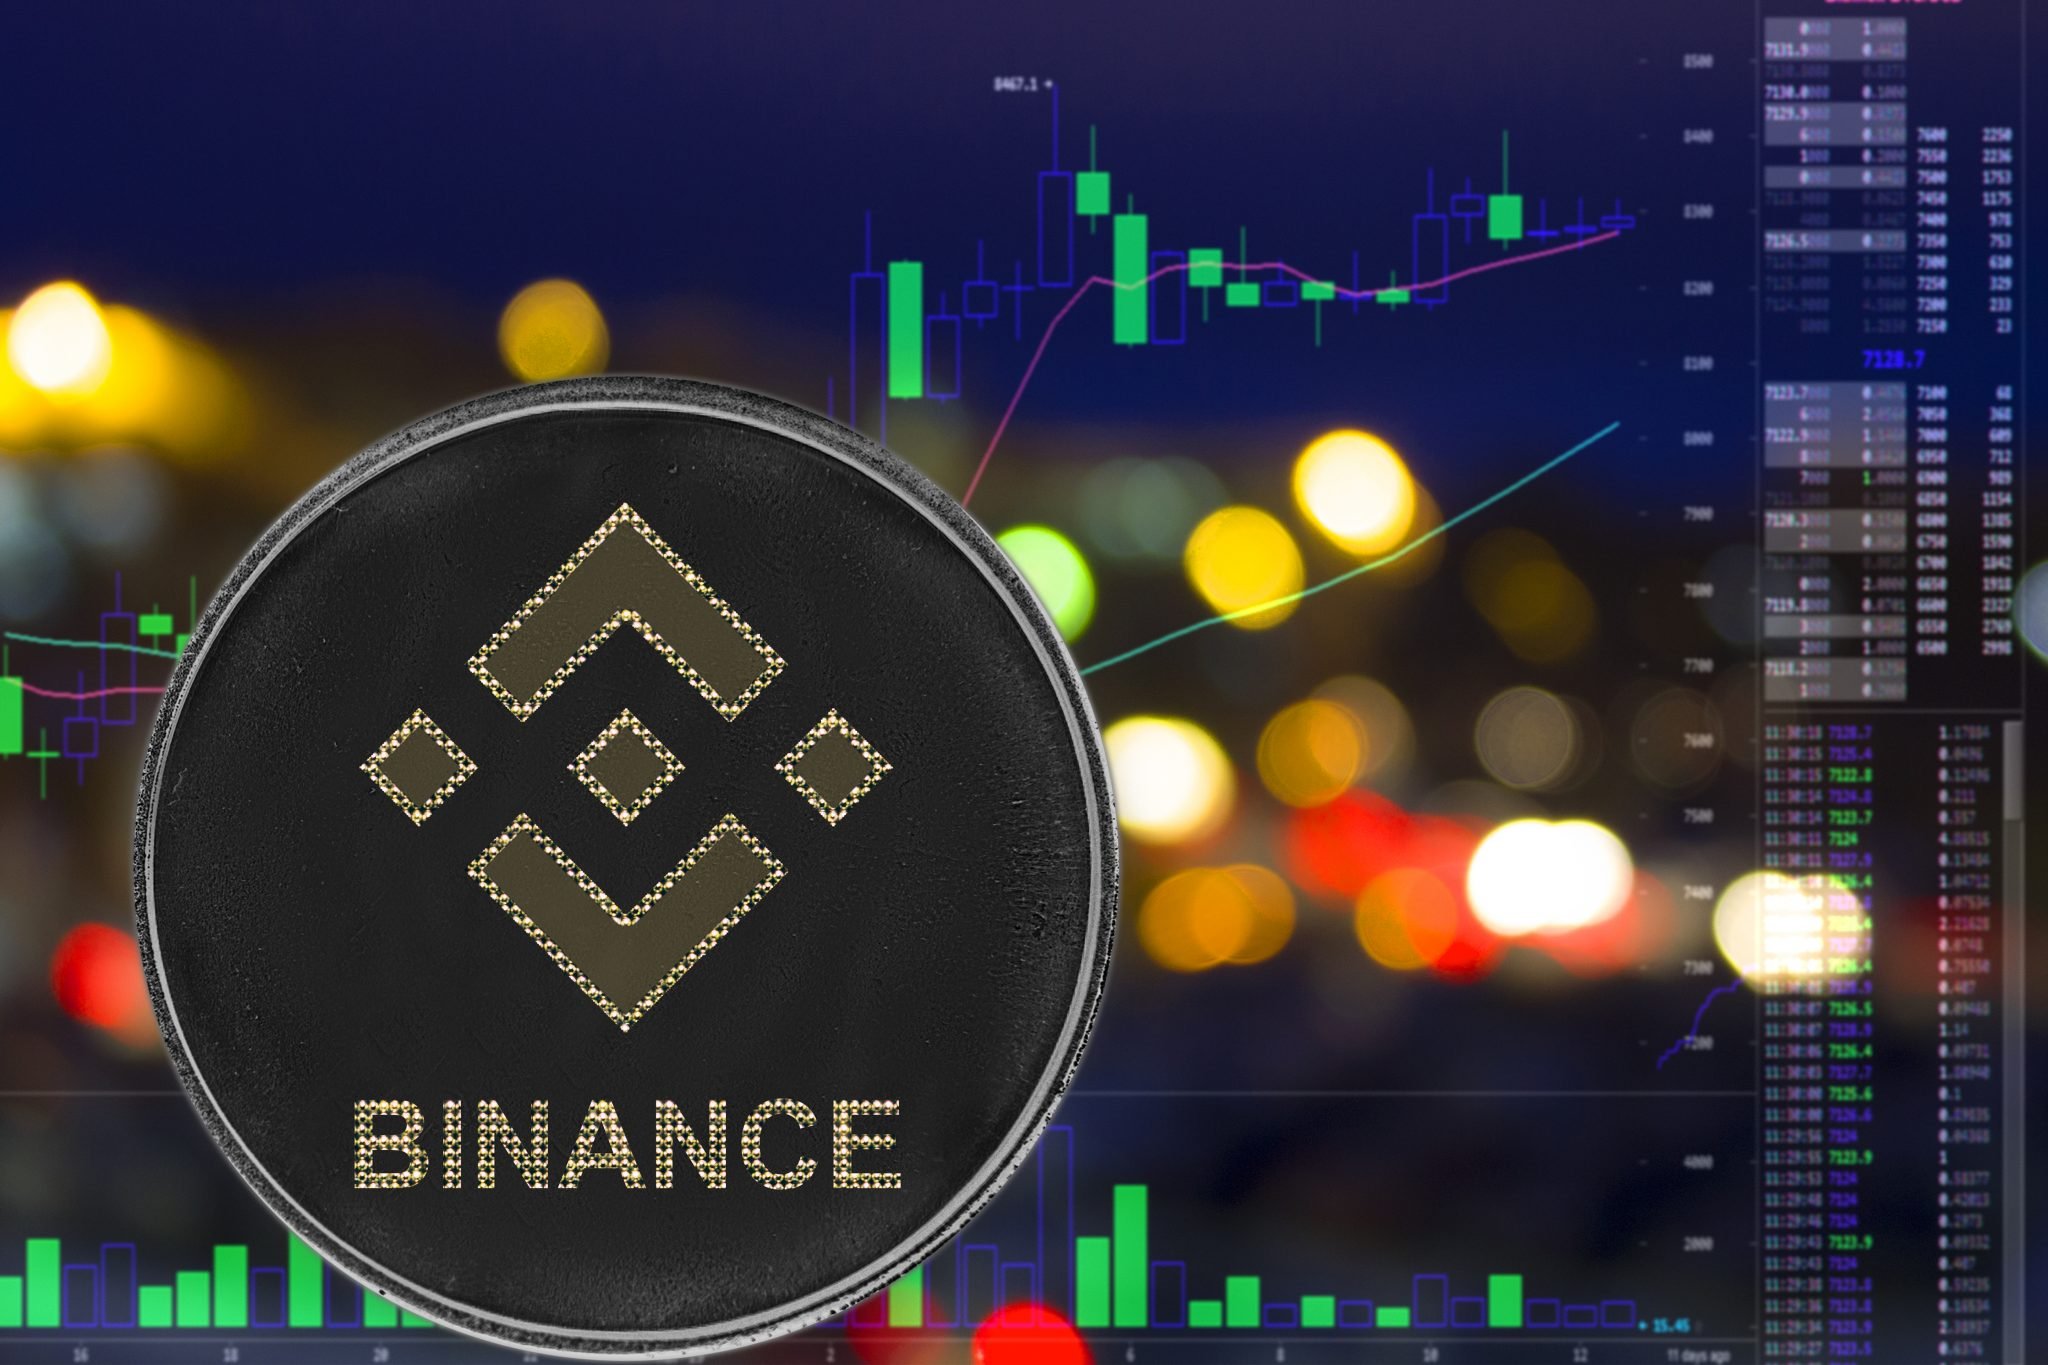 Coin cryptocurrency binance on night city background and chart.